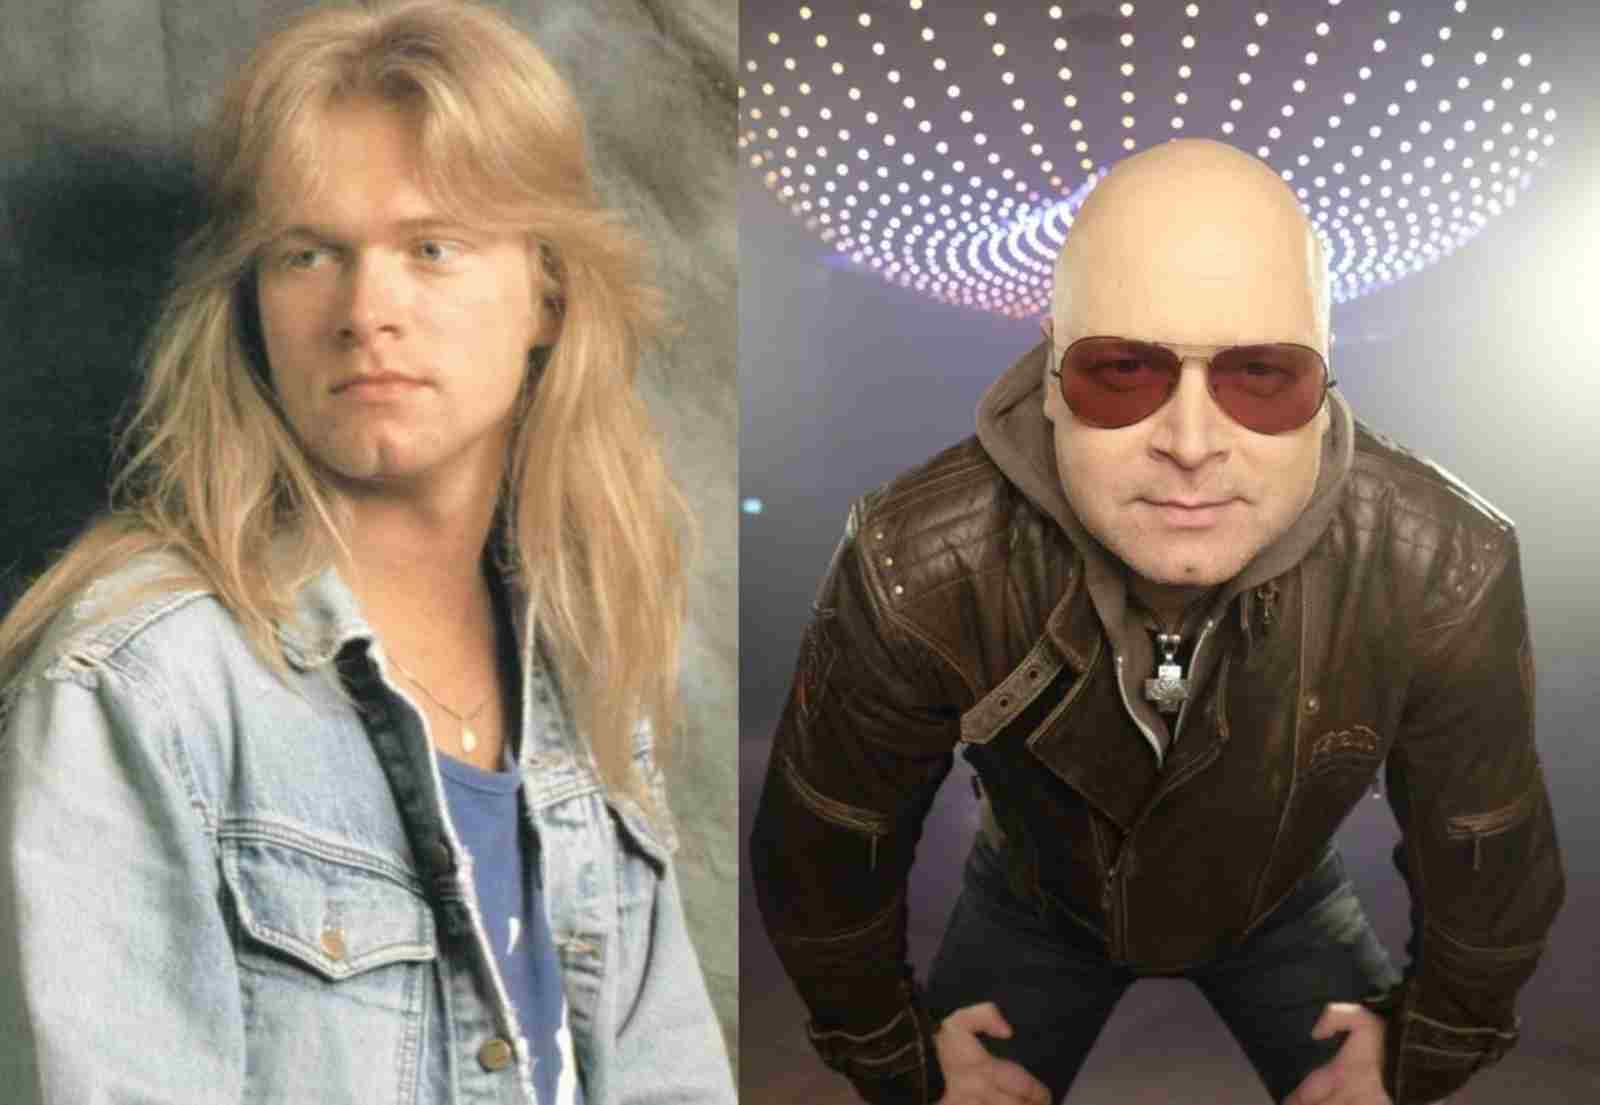 Michael Kiske now and then